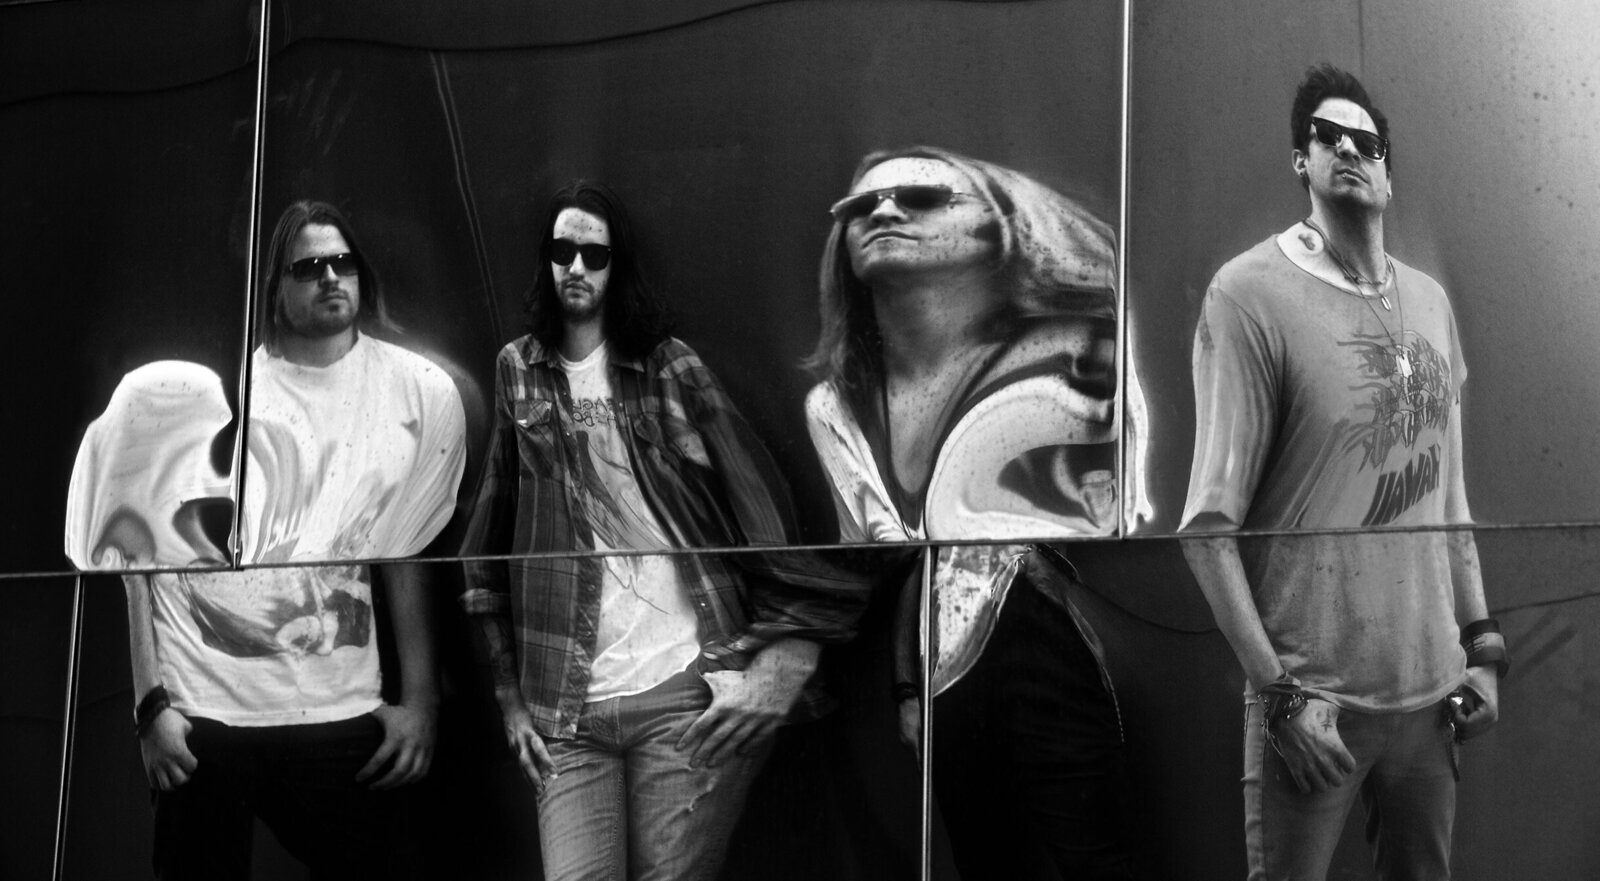 Band Photo Los Angeles black and white four members One Ban Son reflections warped in metal wall